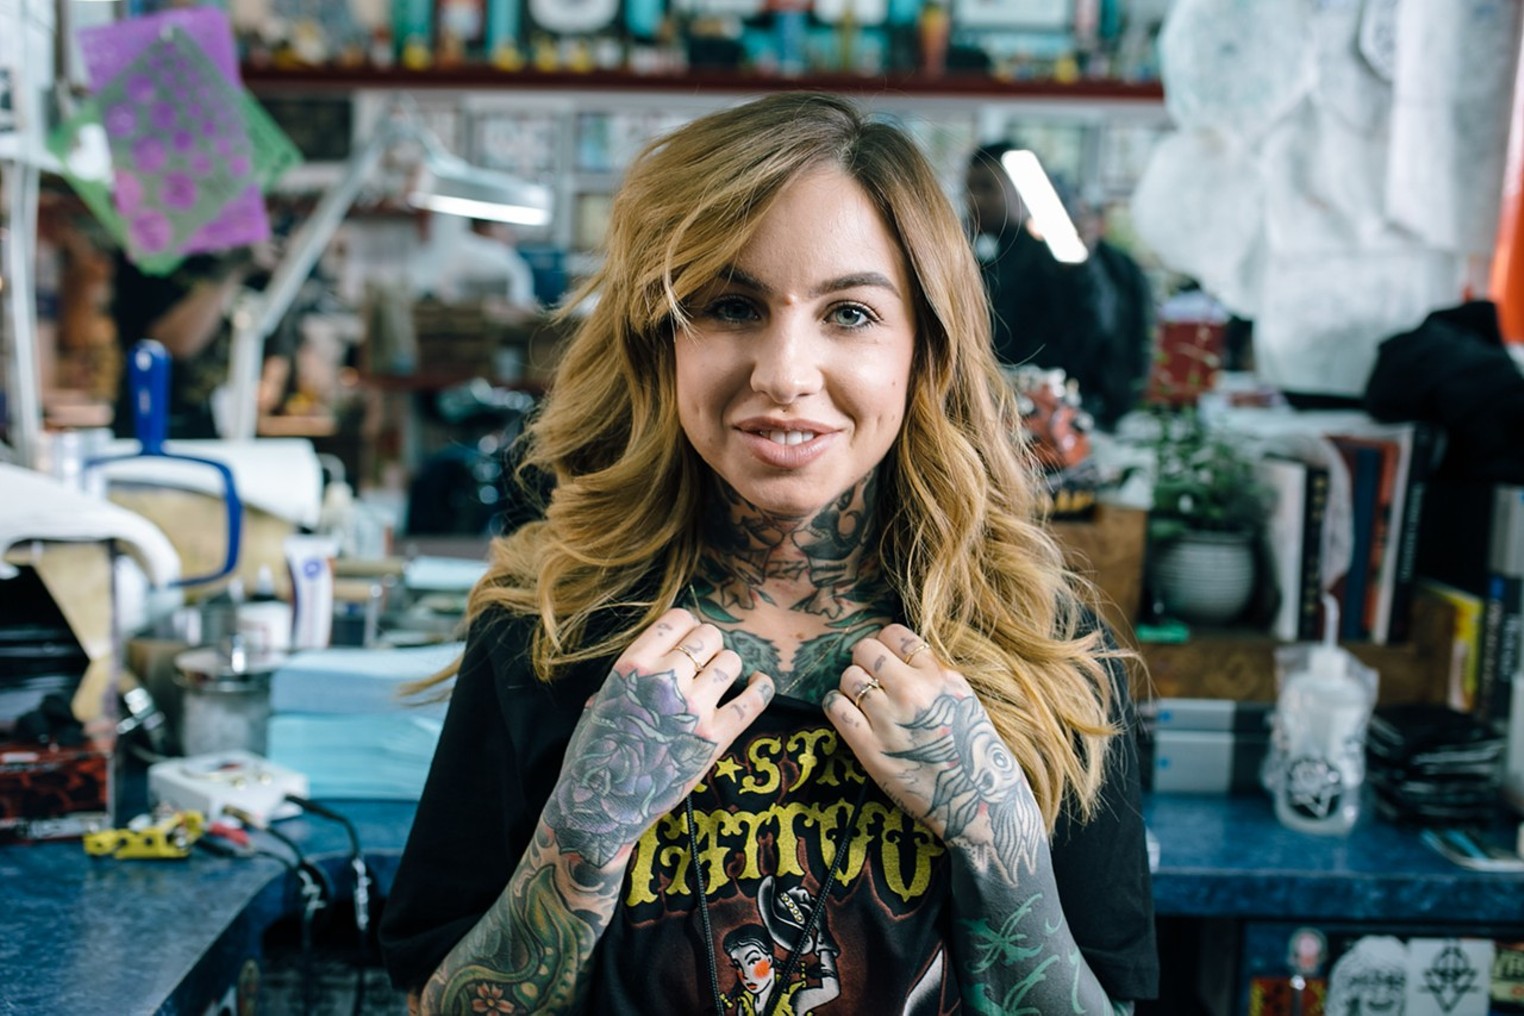 Friday the 13th the luckiest day of the year for tattoo shops